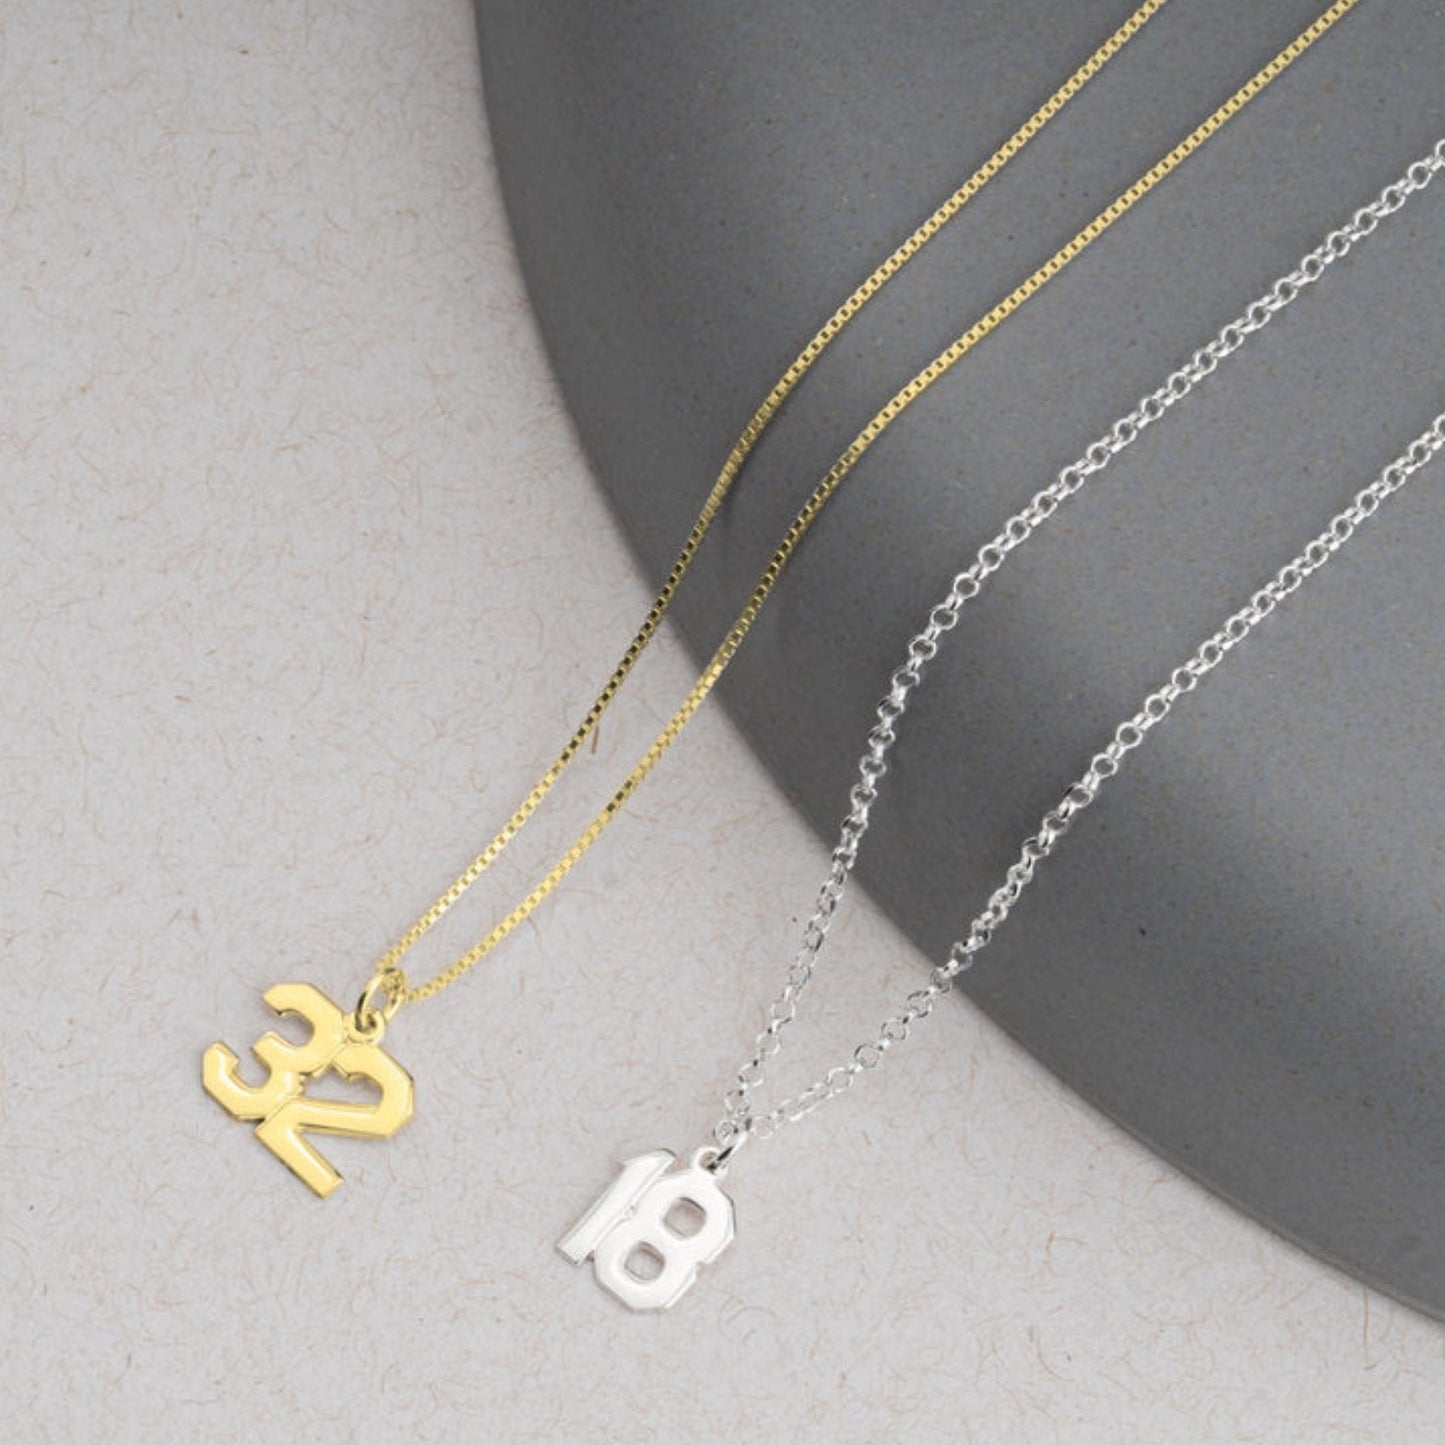 Number Necklace in 925 Sterling Silver